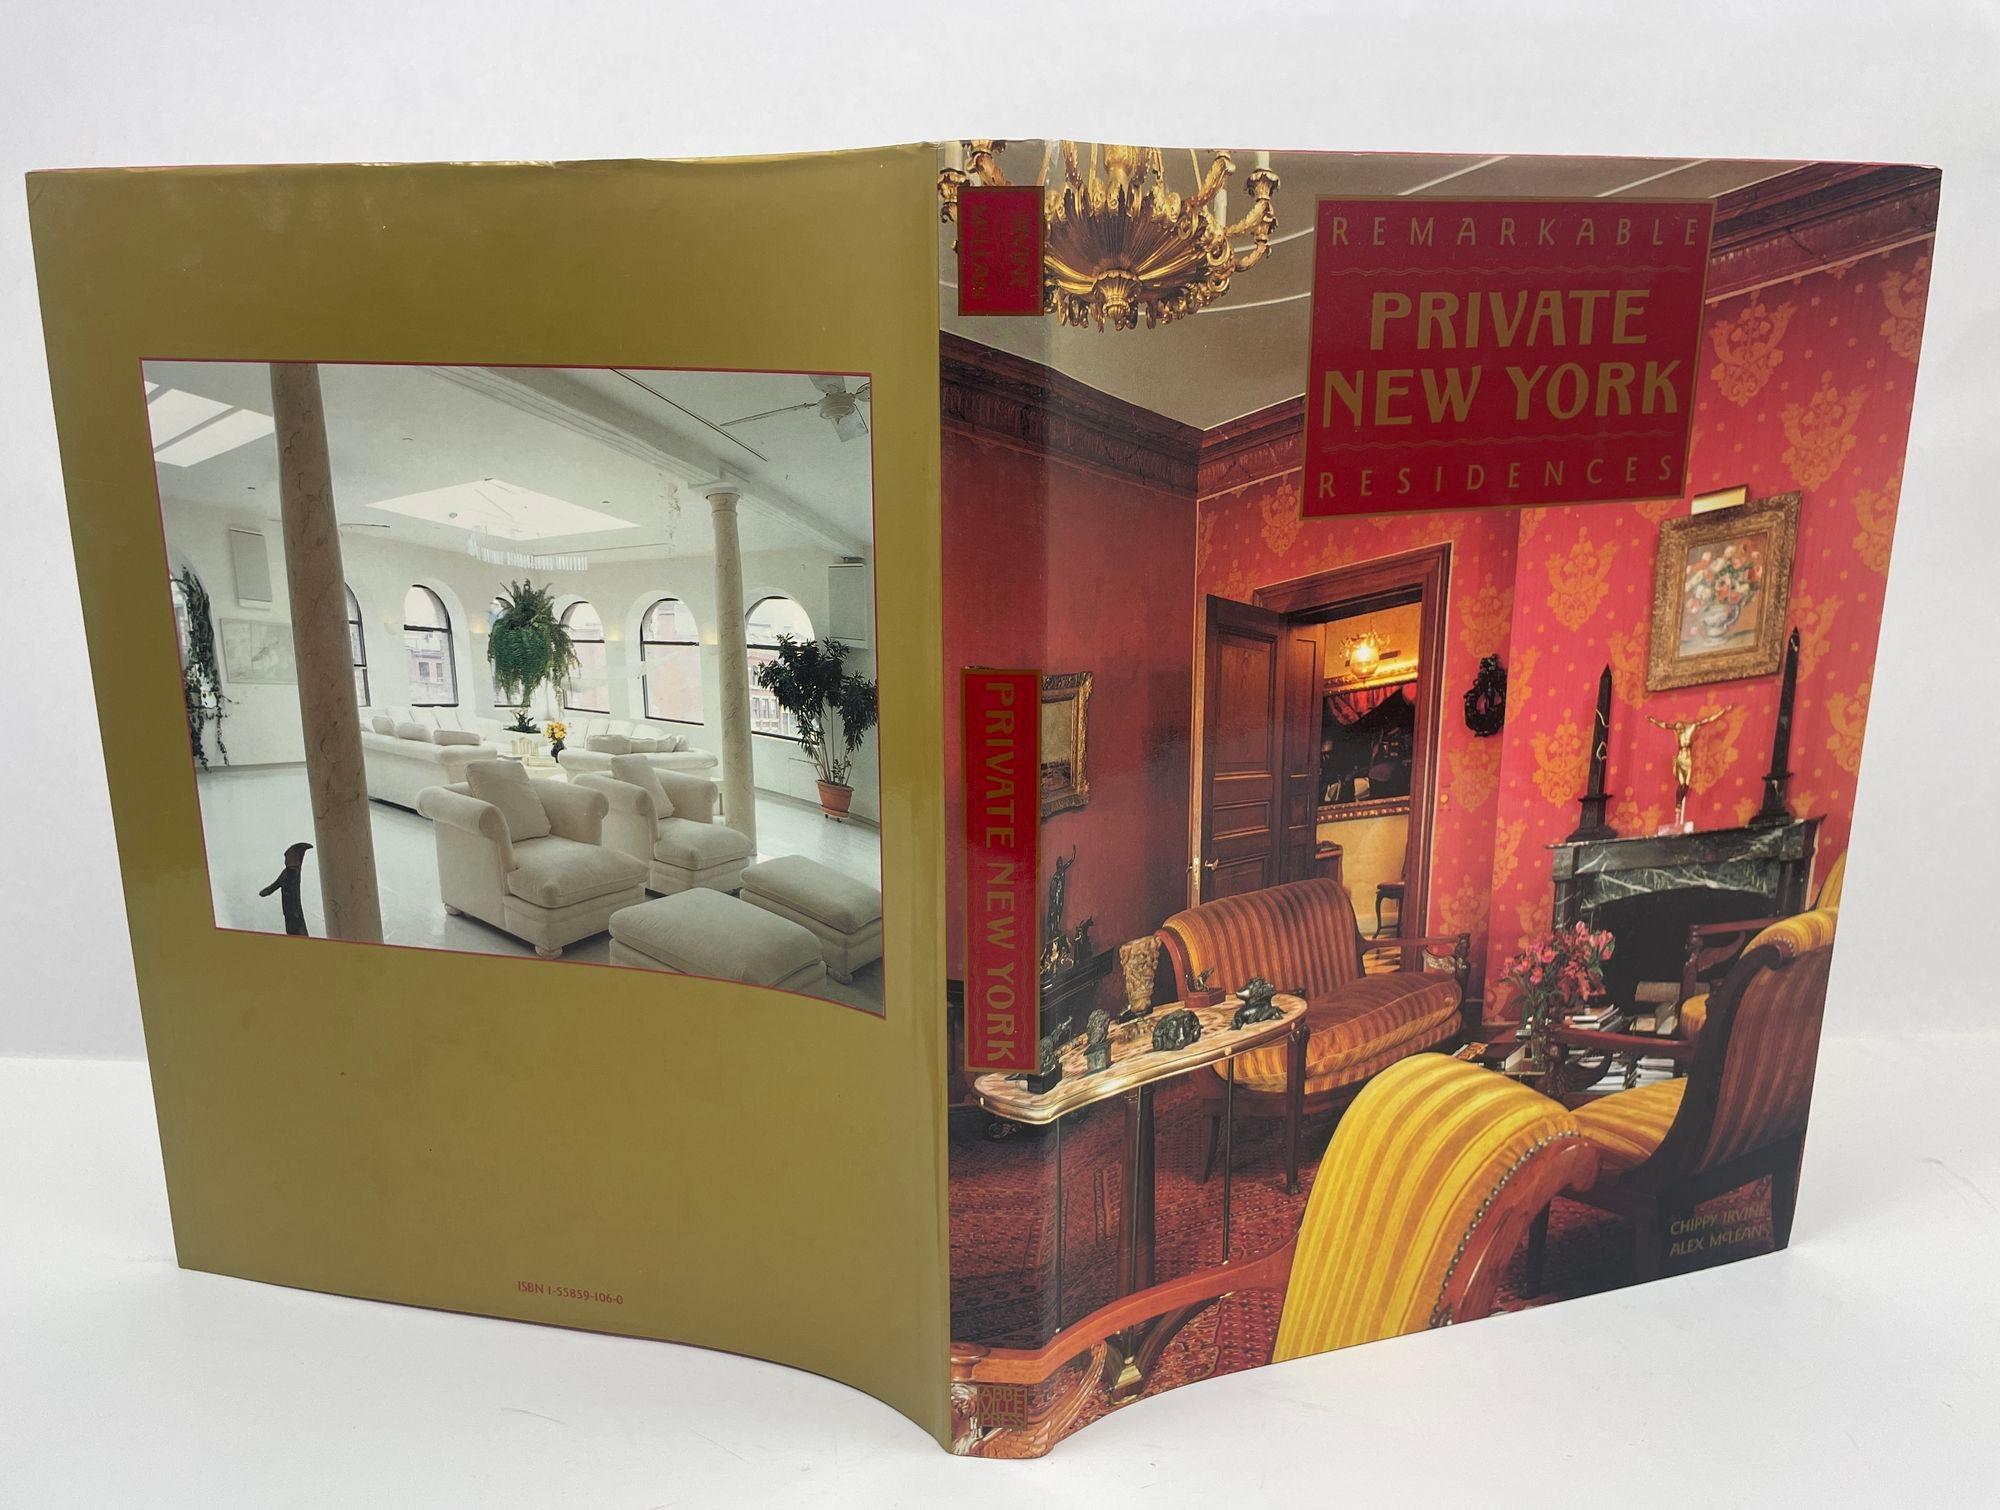 Contemporary New York Apartments: Private Views Hardcover Book by Charles Davey